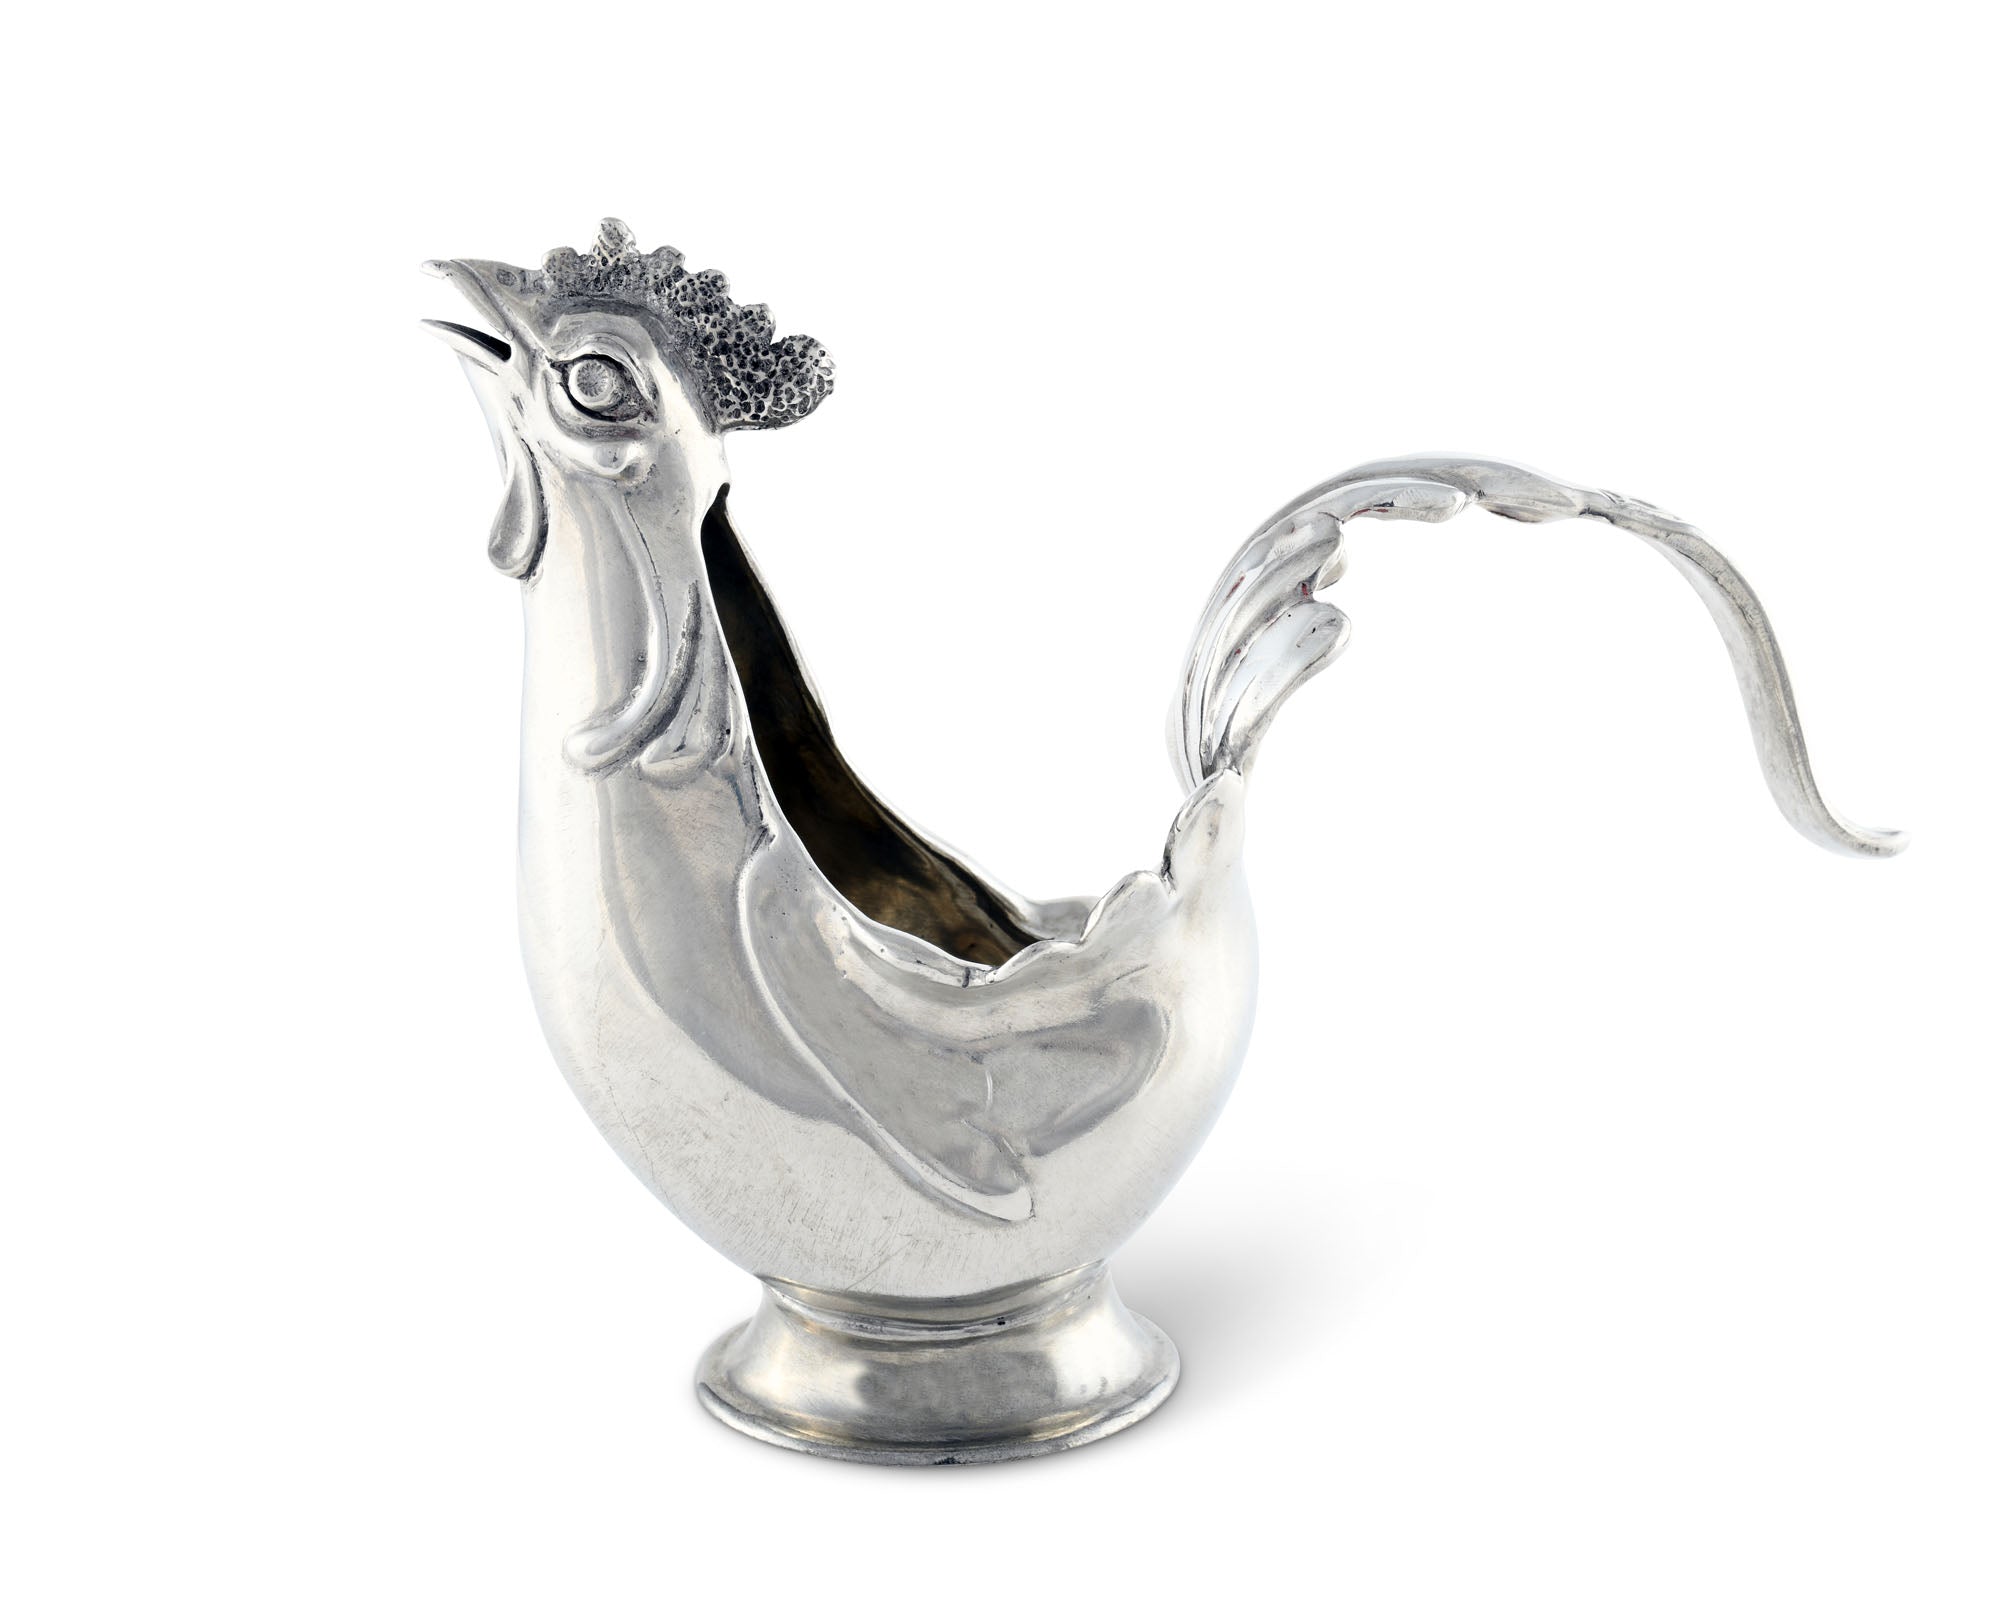 Vagabond House Rooster Creamer Product Image